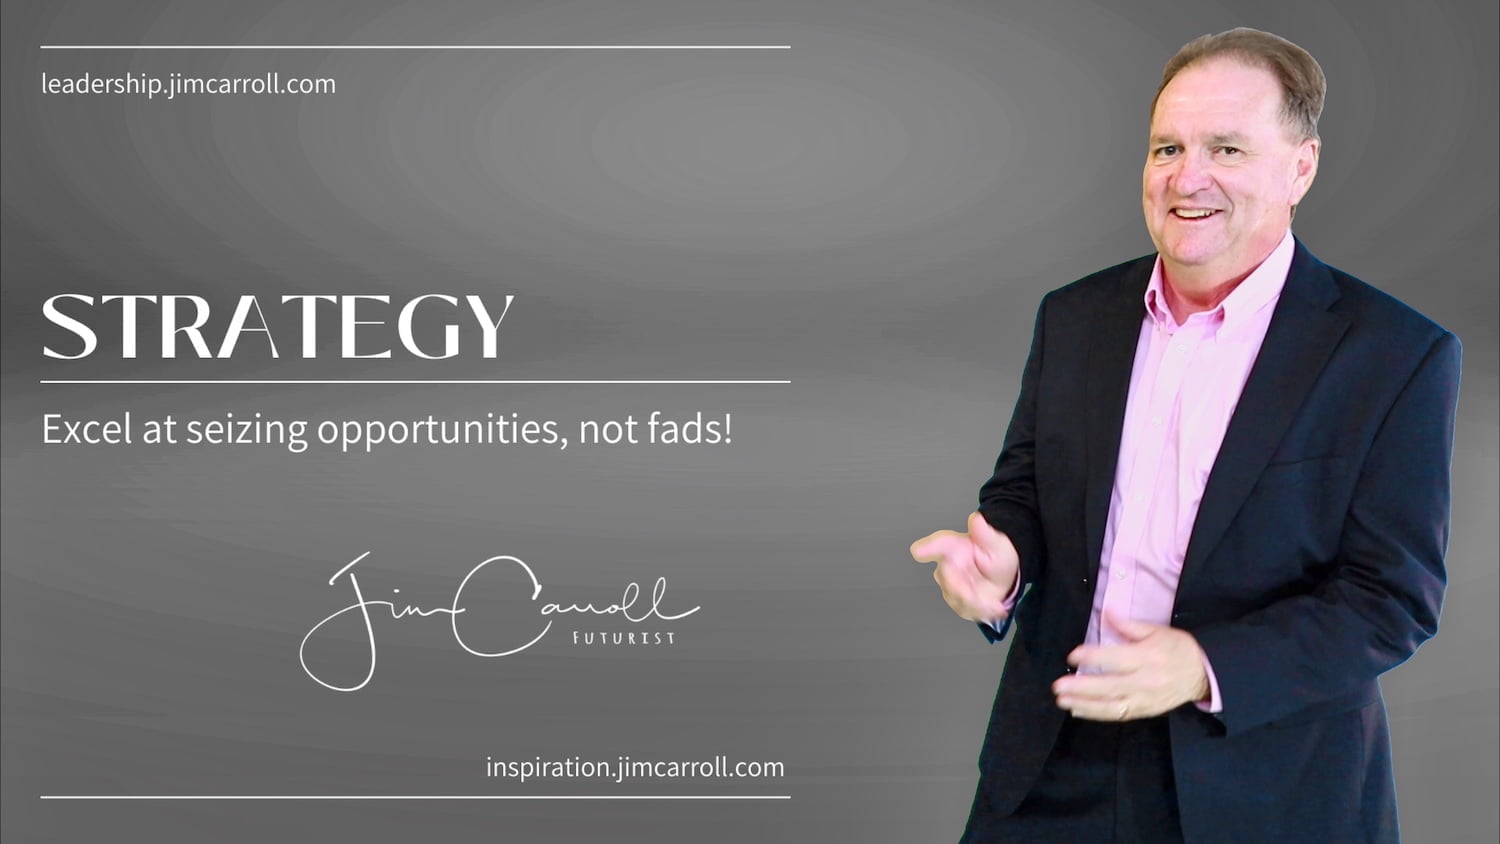 Daily Inspiration: "Excel at seizing opportunities, not fads!"